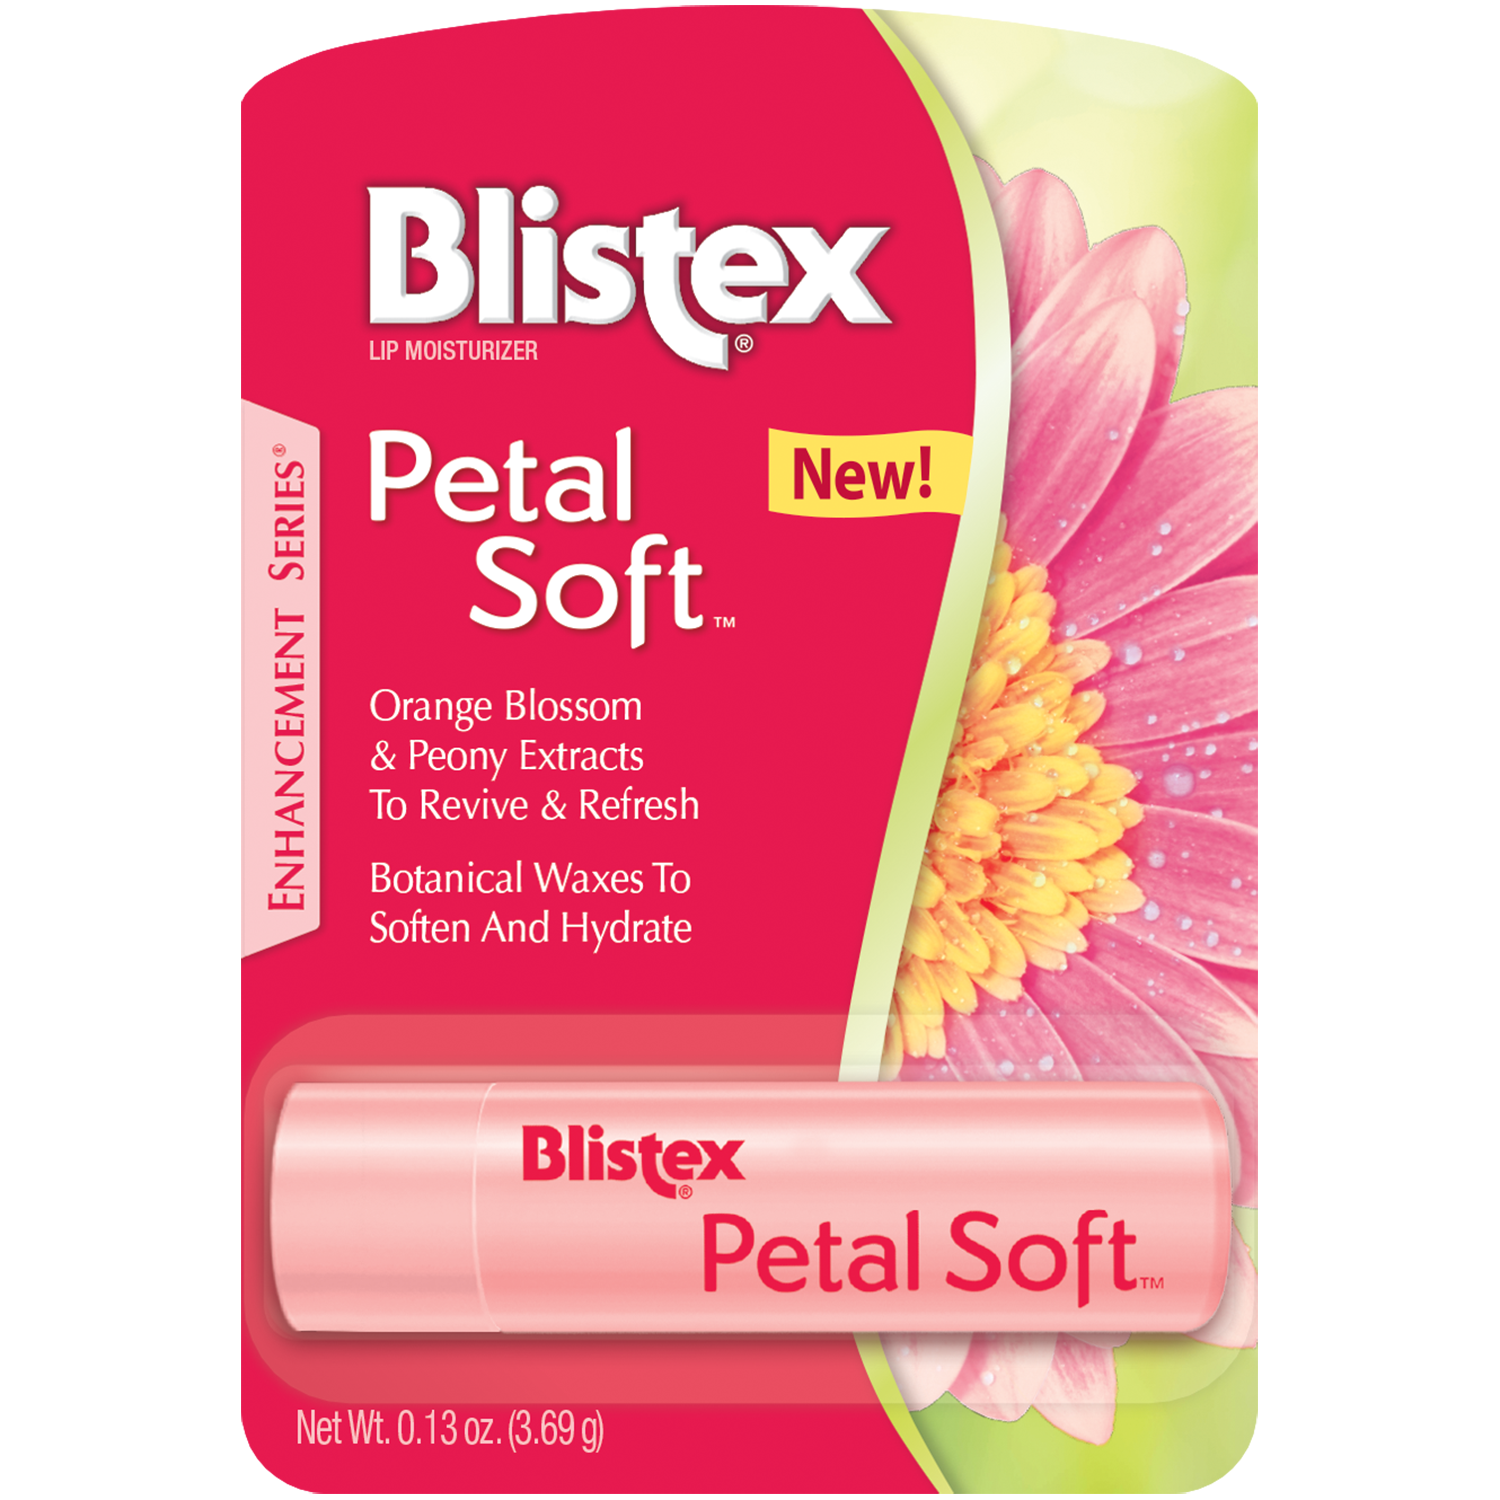 Blistex Petal Soft Lip Balm with Natural Flower Extracts - image 1 of 4